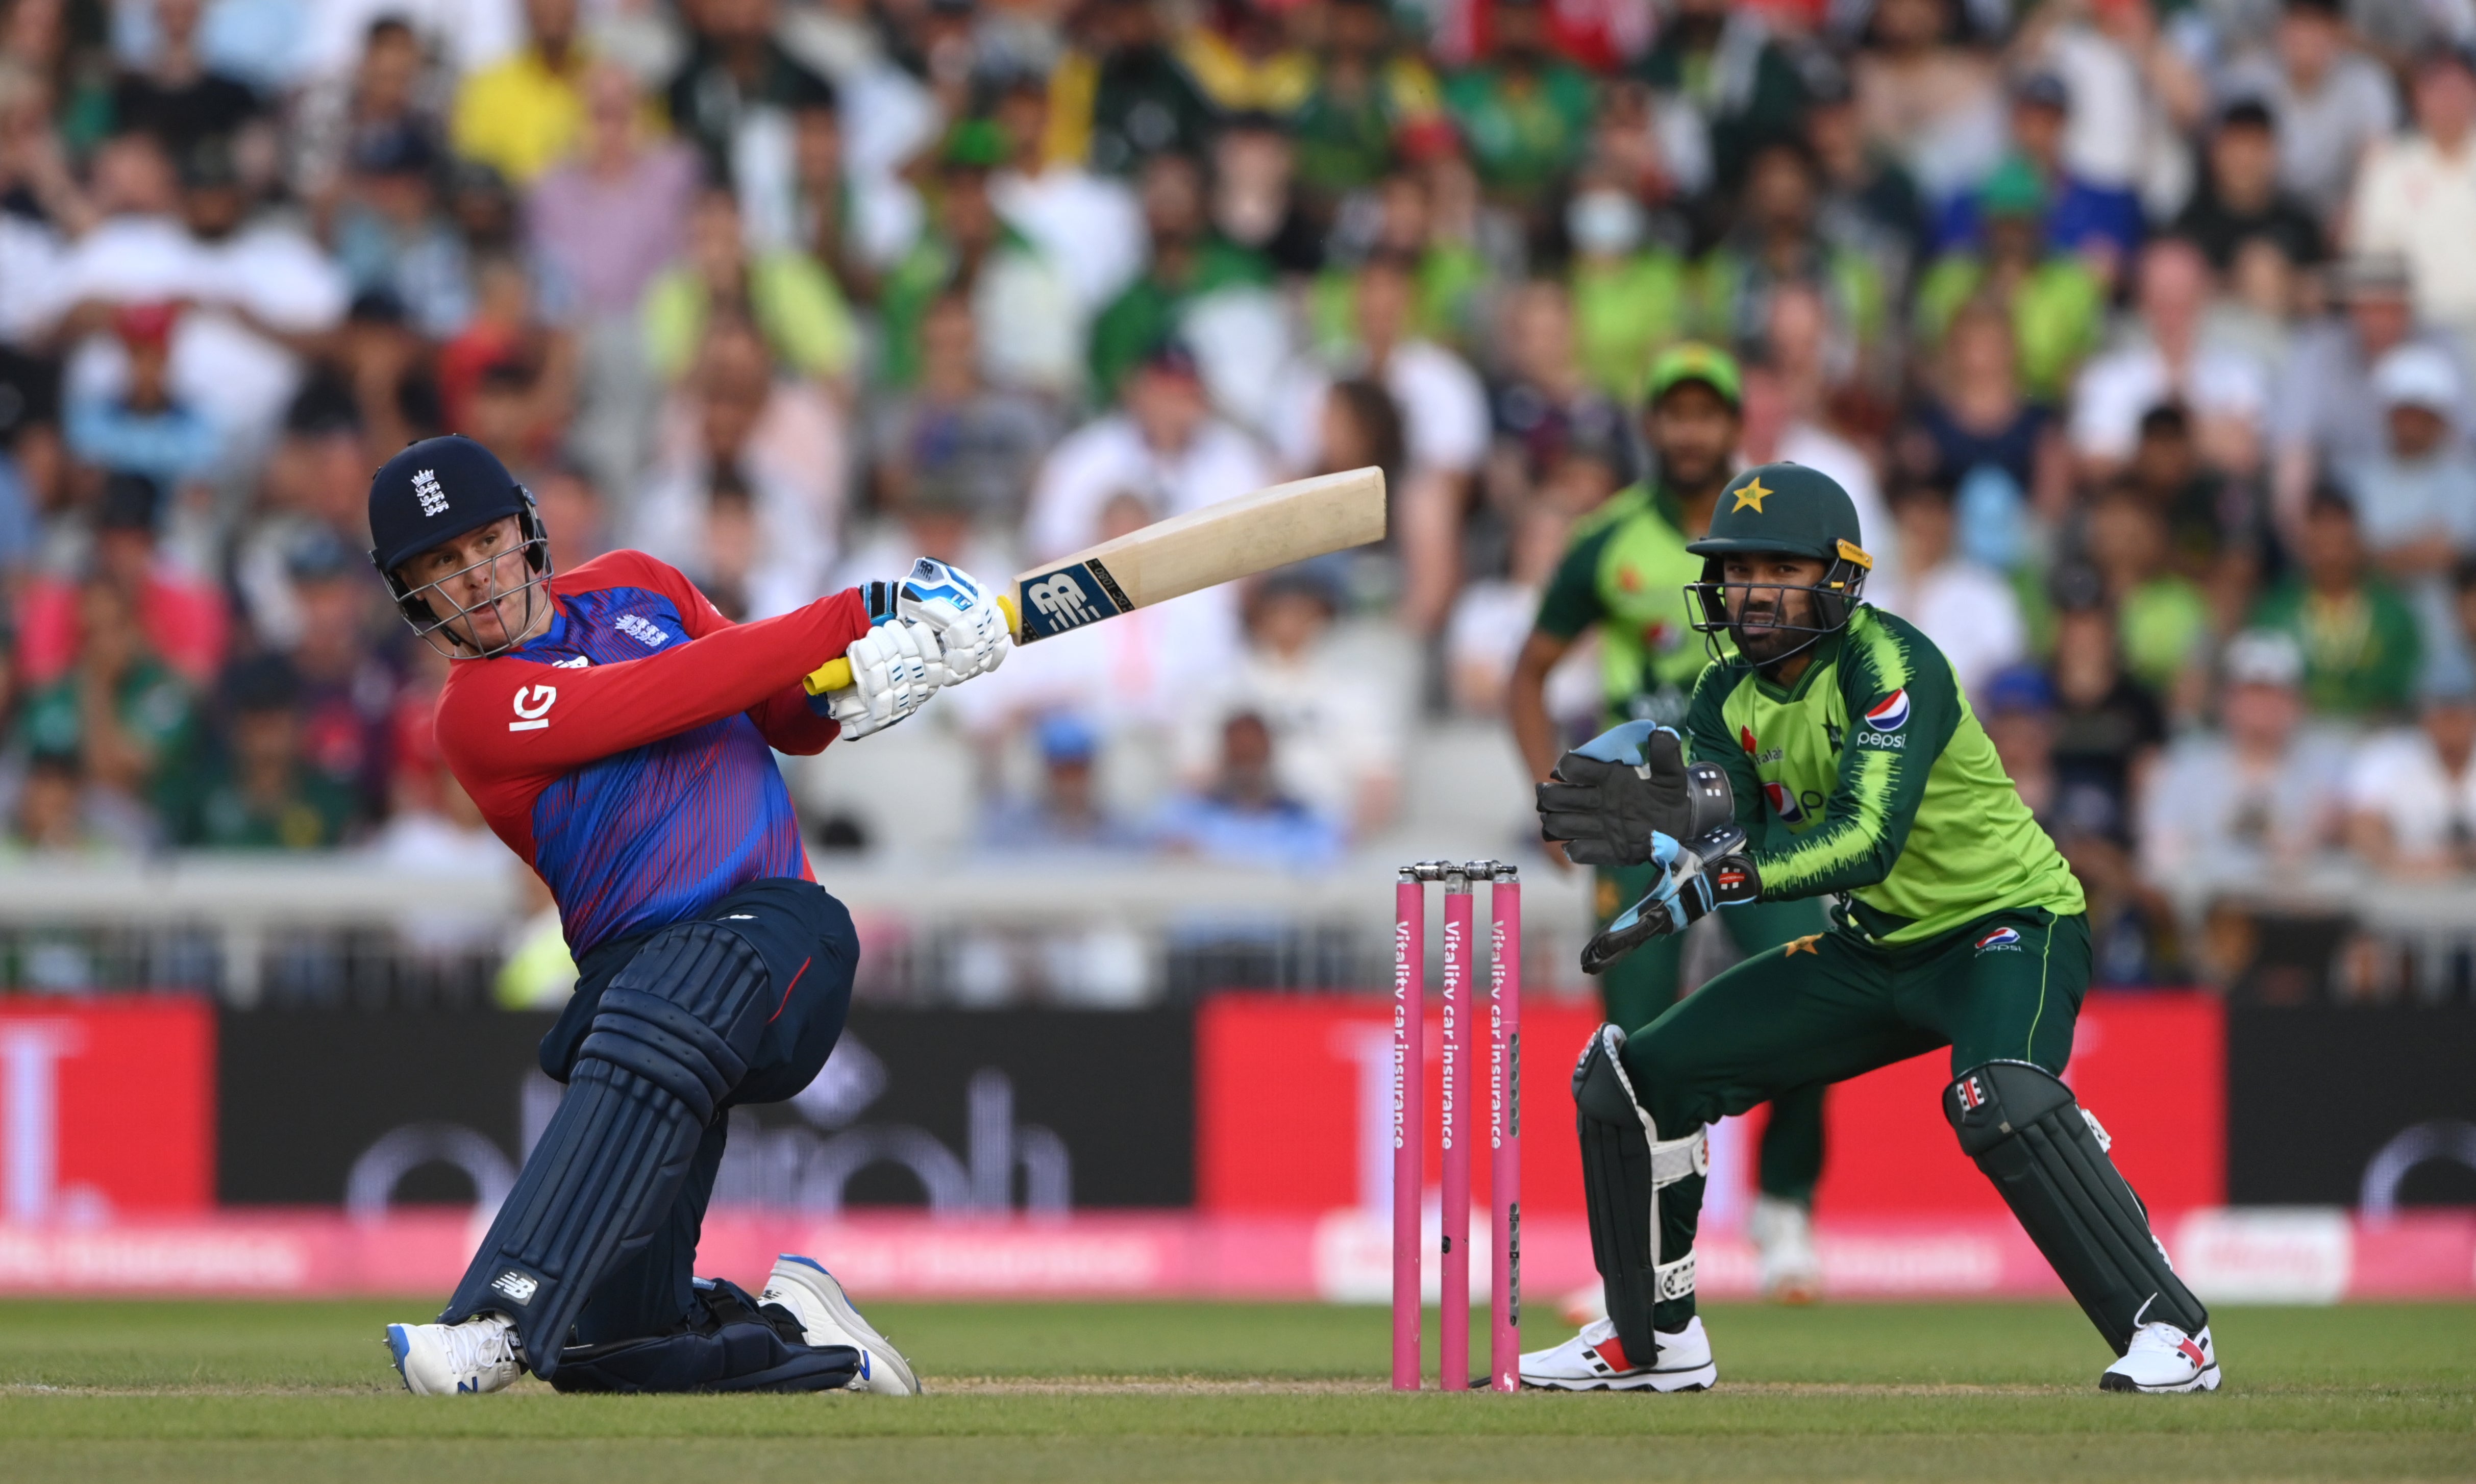 England edged Pakistan 2-1 in the T20 series in July